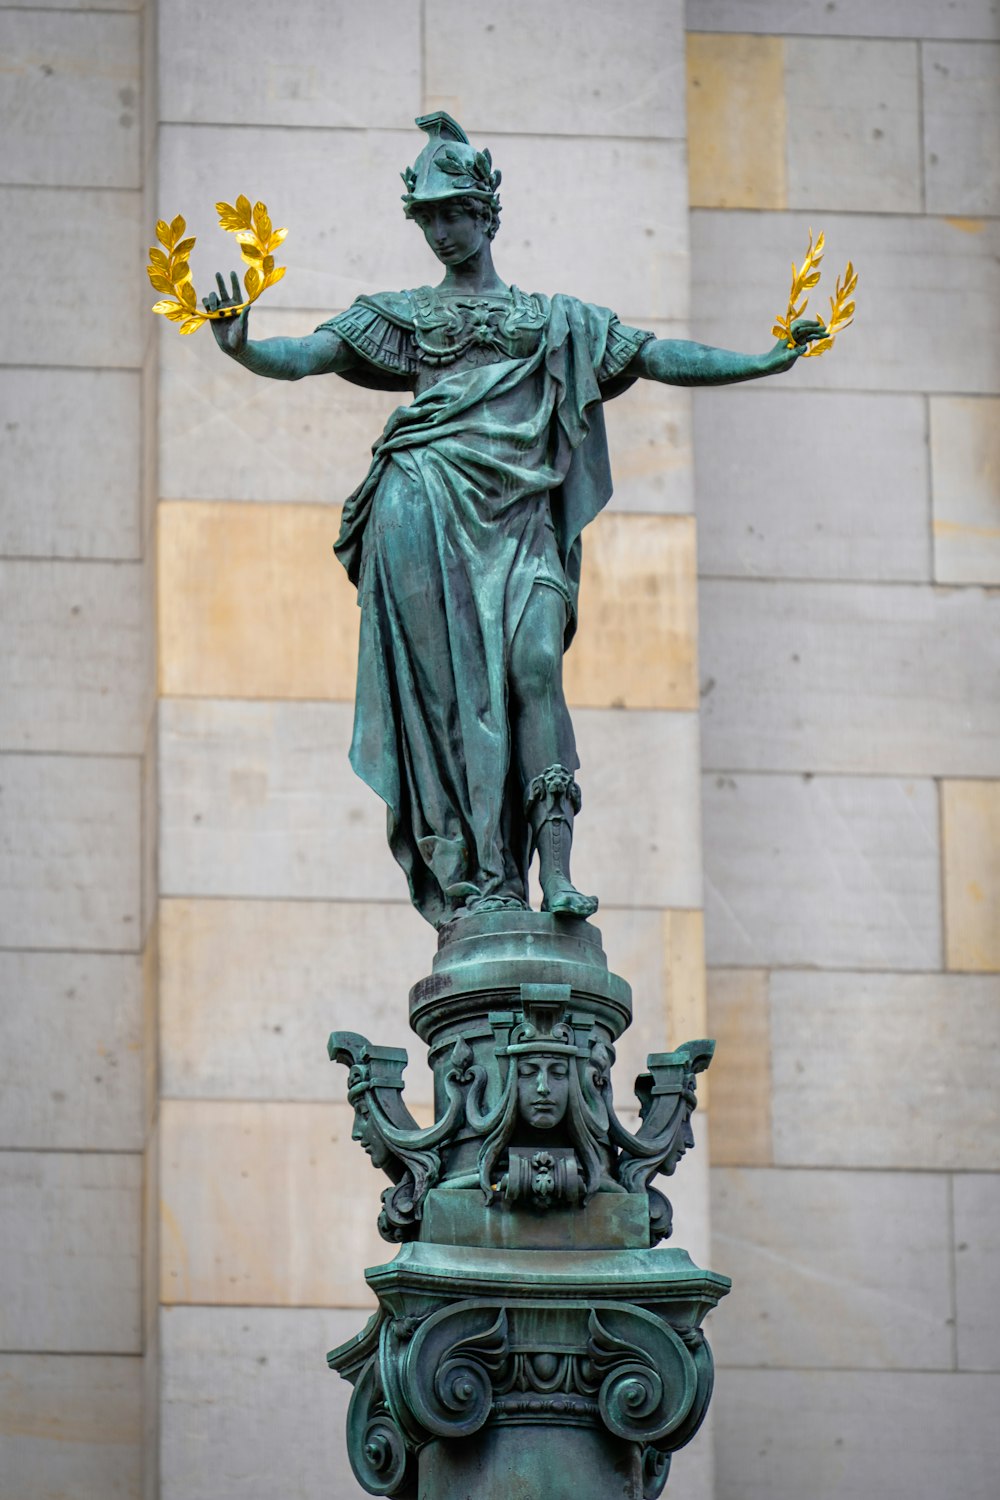 a statue of a person holding flowers